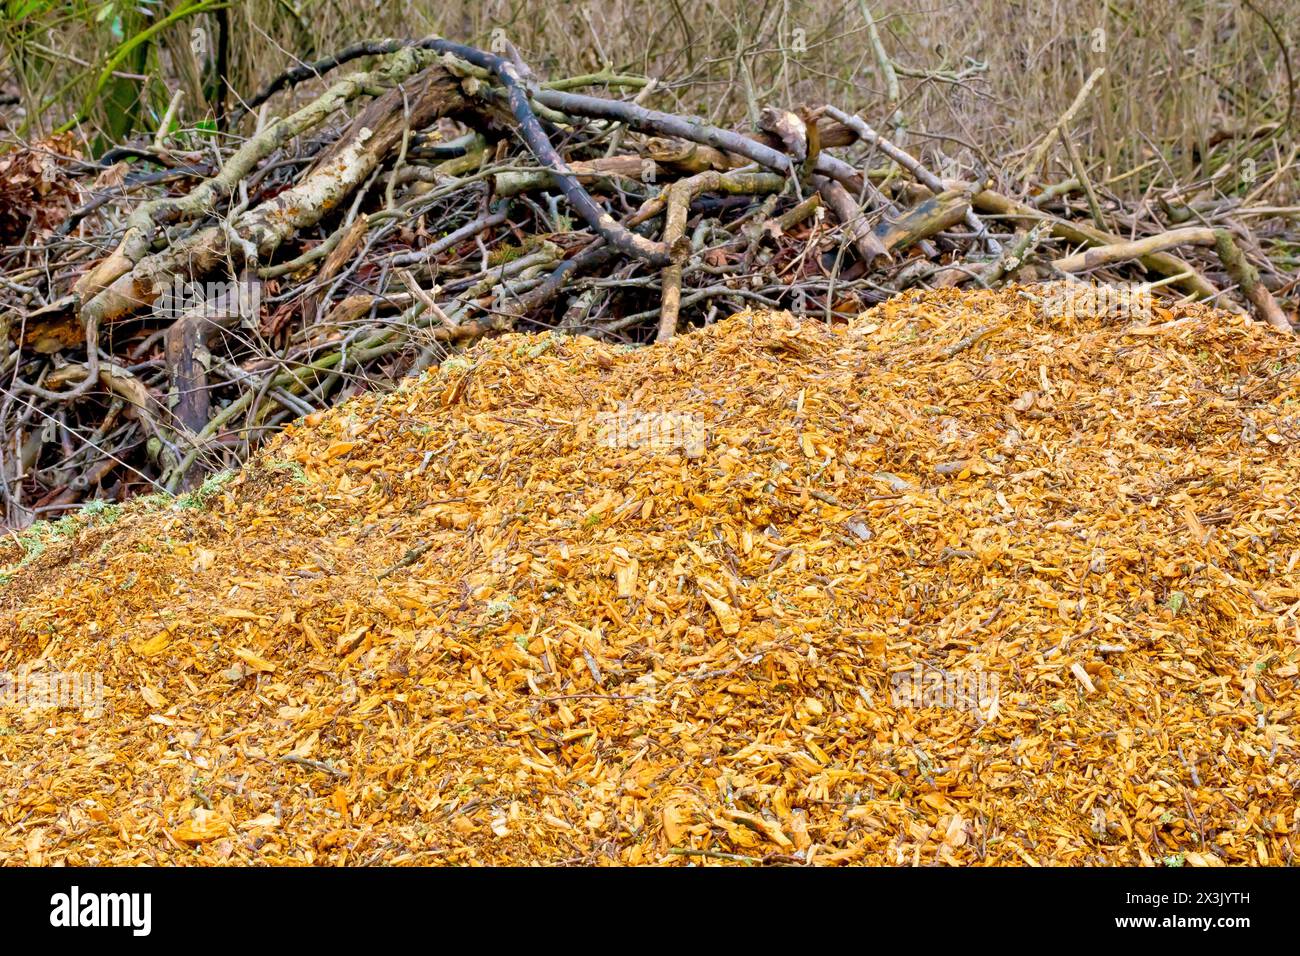 Close up of a pile of wood chips and tree branches left lying on a woodland floor after a fallen tree was cleared away. Stock Photo